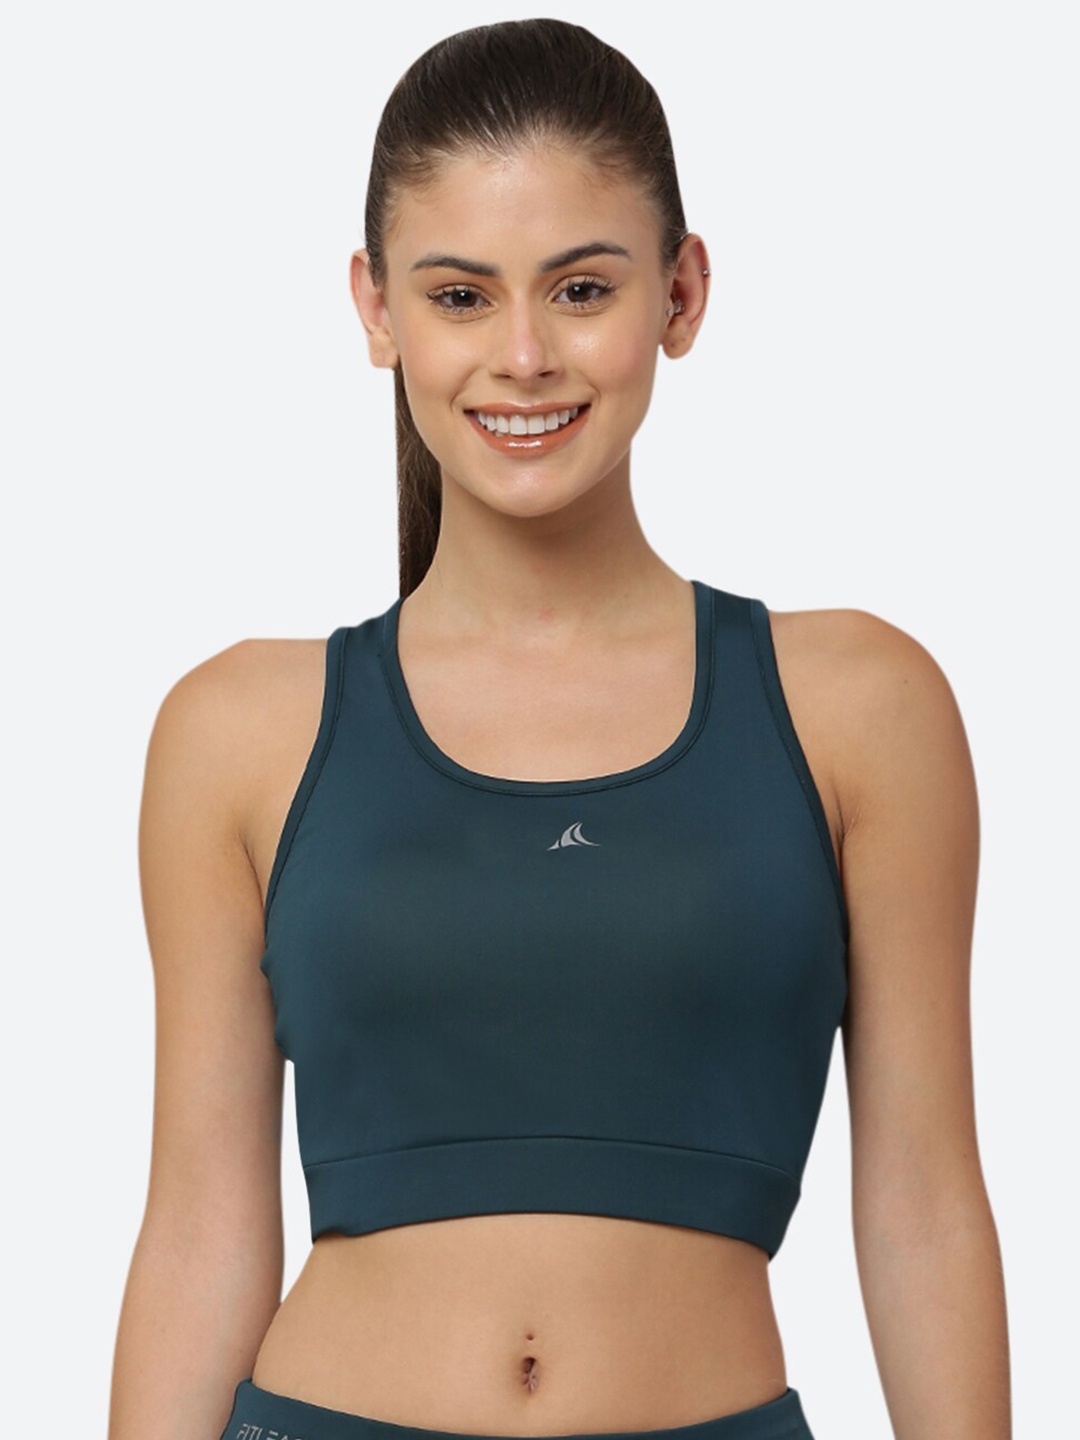 

FITLEASURE Luxe Gym Training/Workout Green Sports Bra